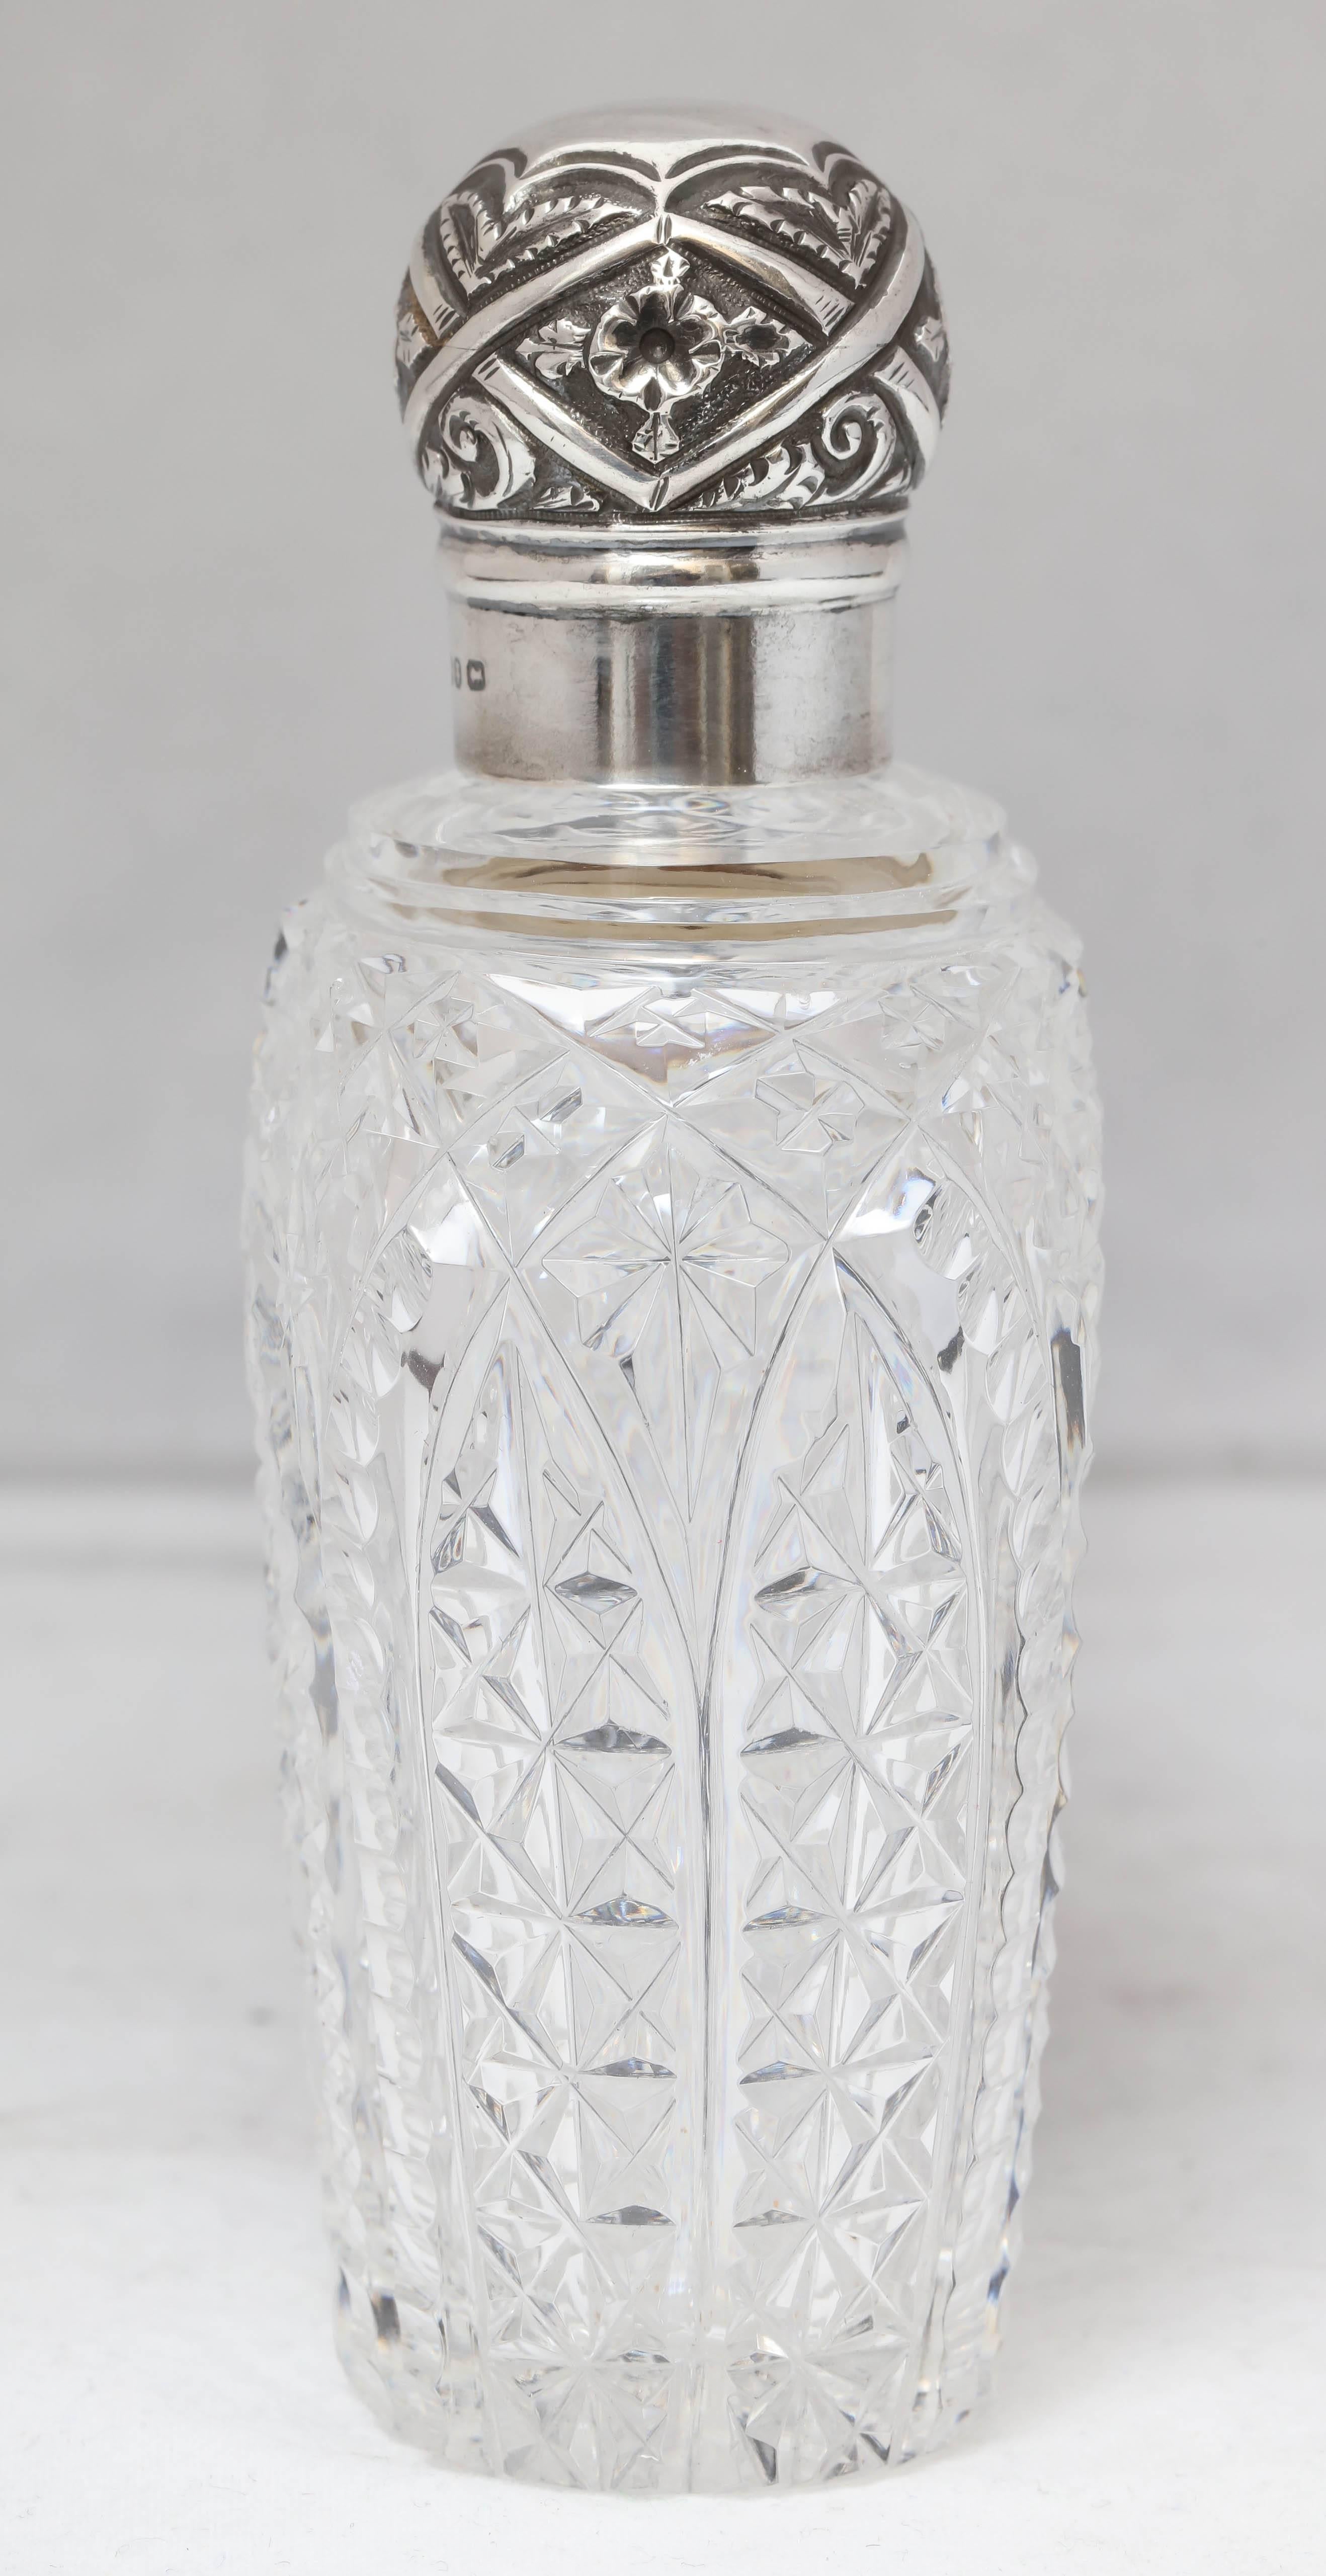 English Sterling Silver-Mounted Cut Crystal Perfume Flask